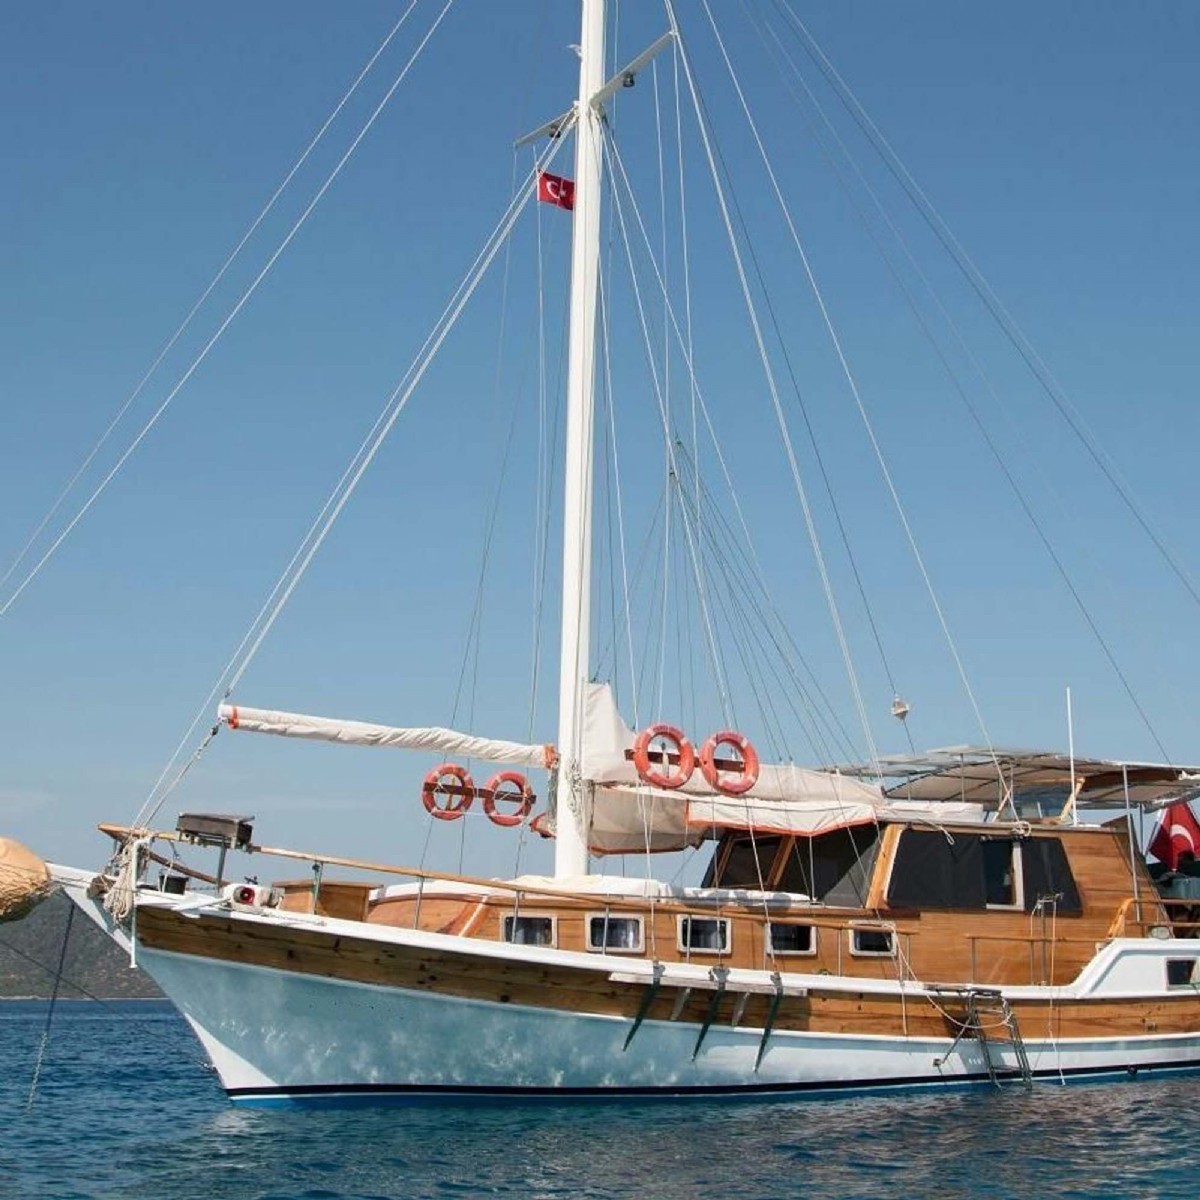 8 person yacht charter